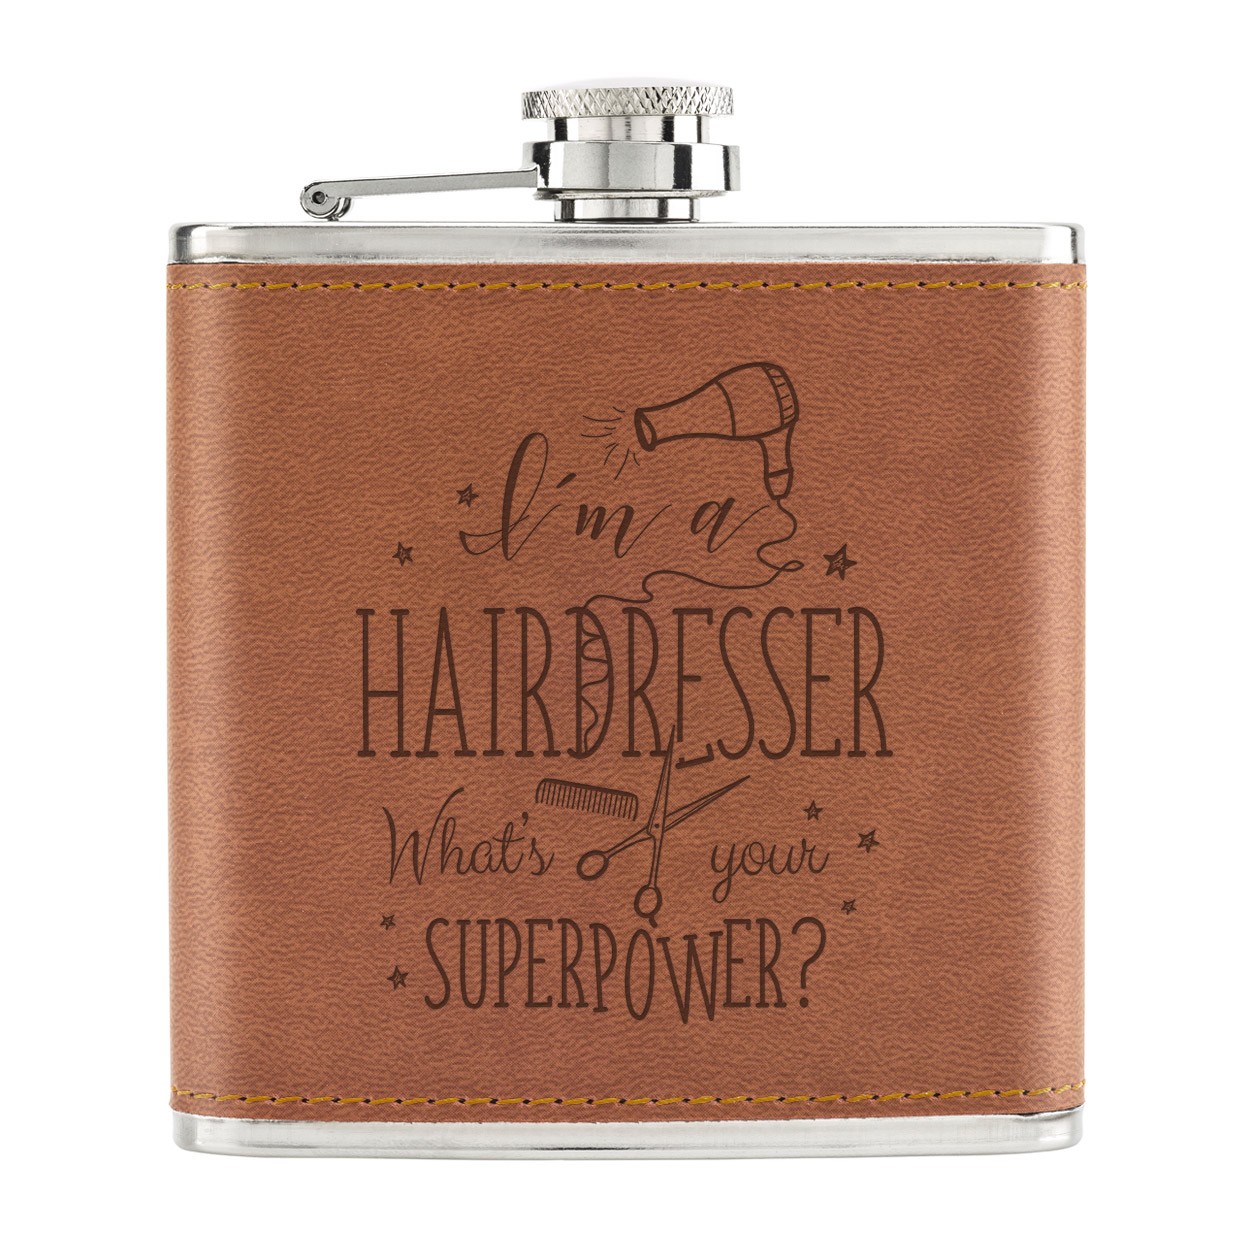 I'm A Hairdresser What's Your Superpower 6oz PU Leather Hip Flask Tan